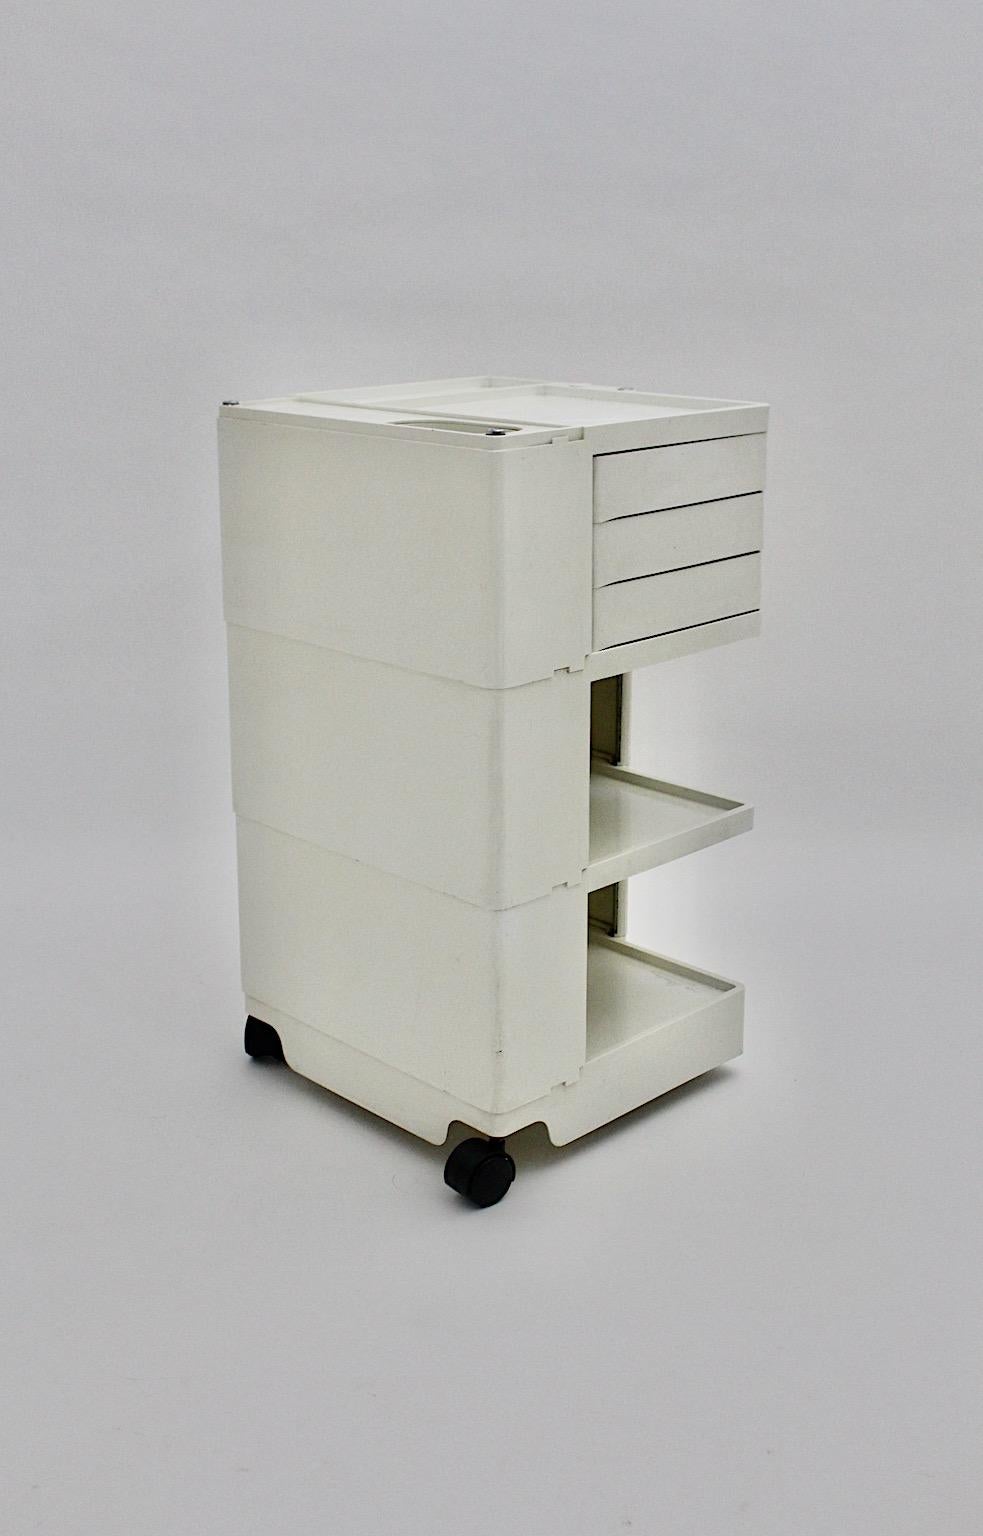 Space Age White Plastic Vintage Storage Trolley Container Joe Colombo 1970 Italy For Sale 4